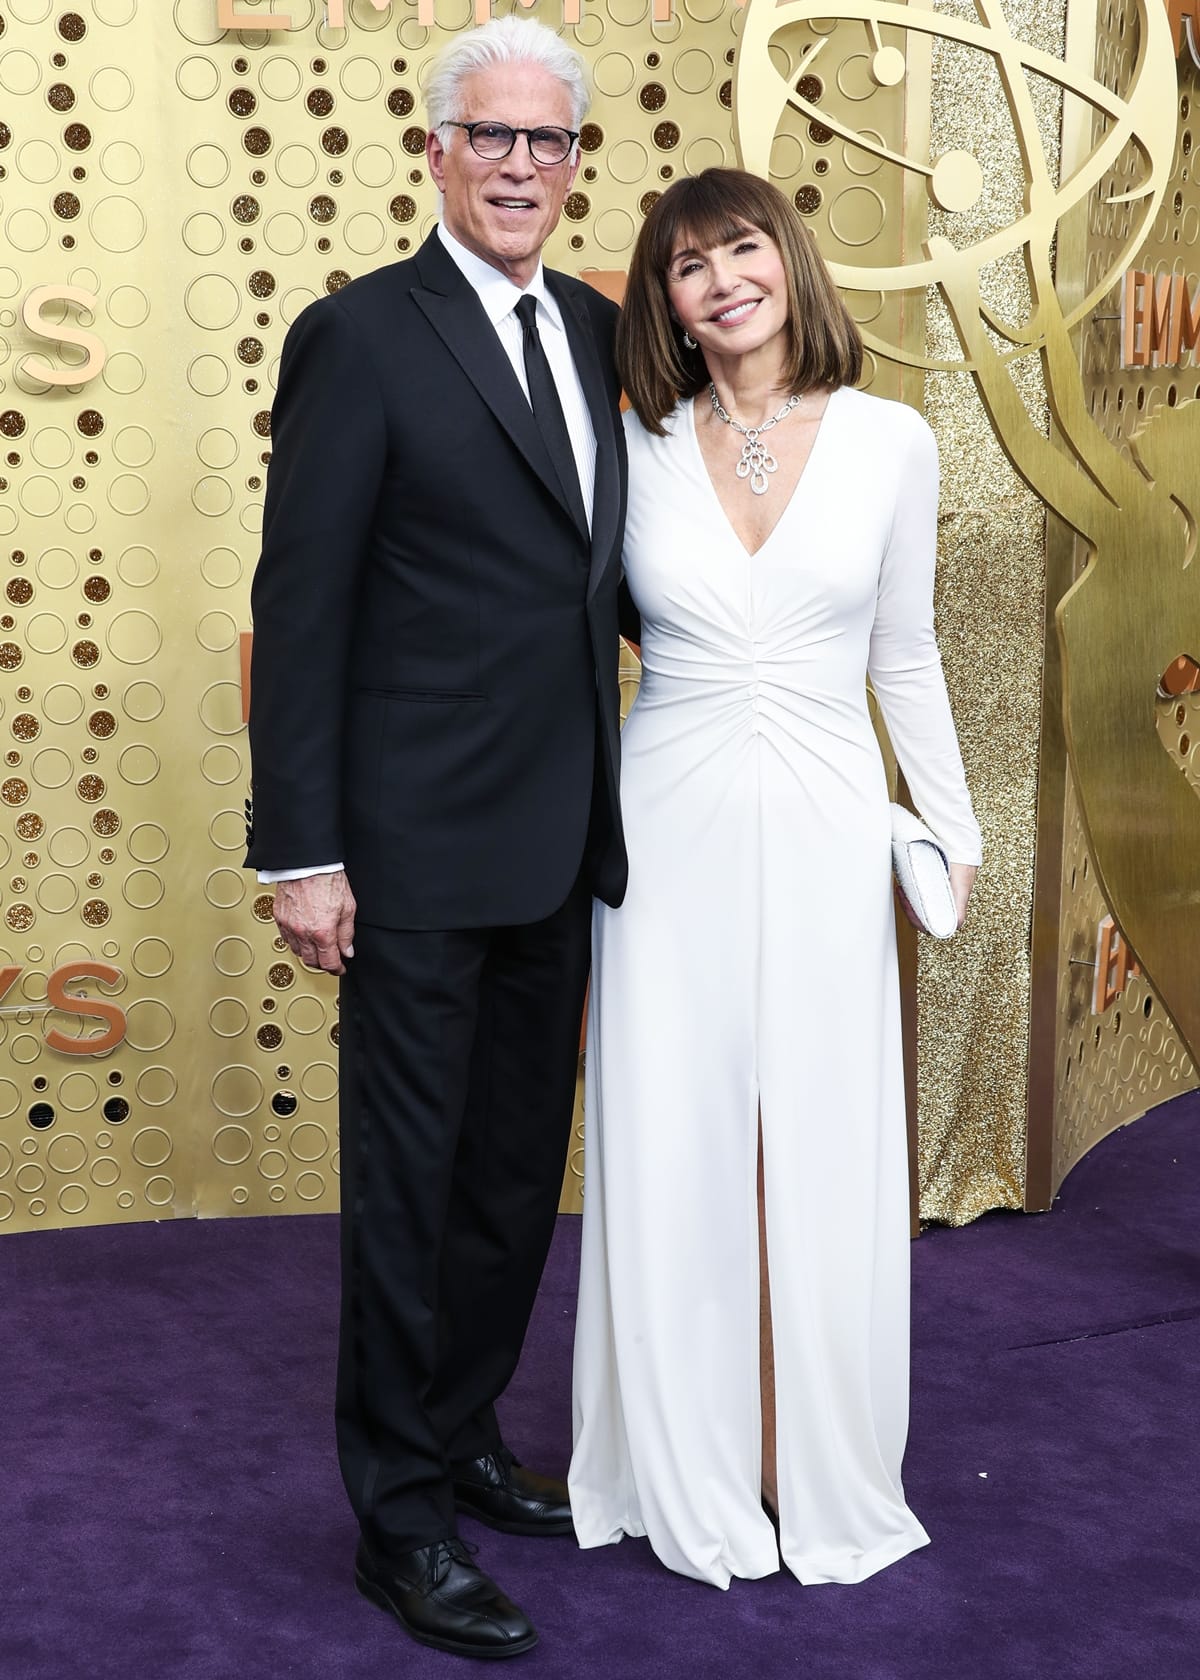 Ted Danson and his wife Mary Steenburgen at the 71st Annual Primetime Emmy Awards